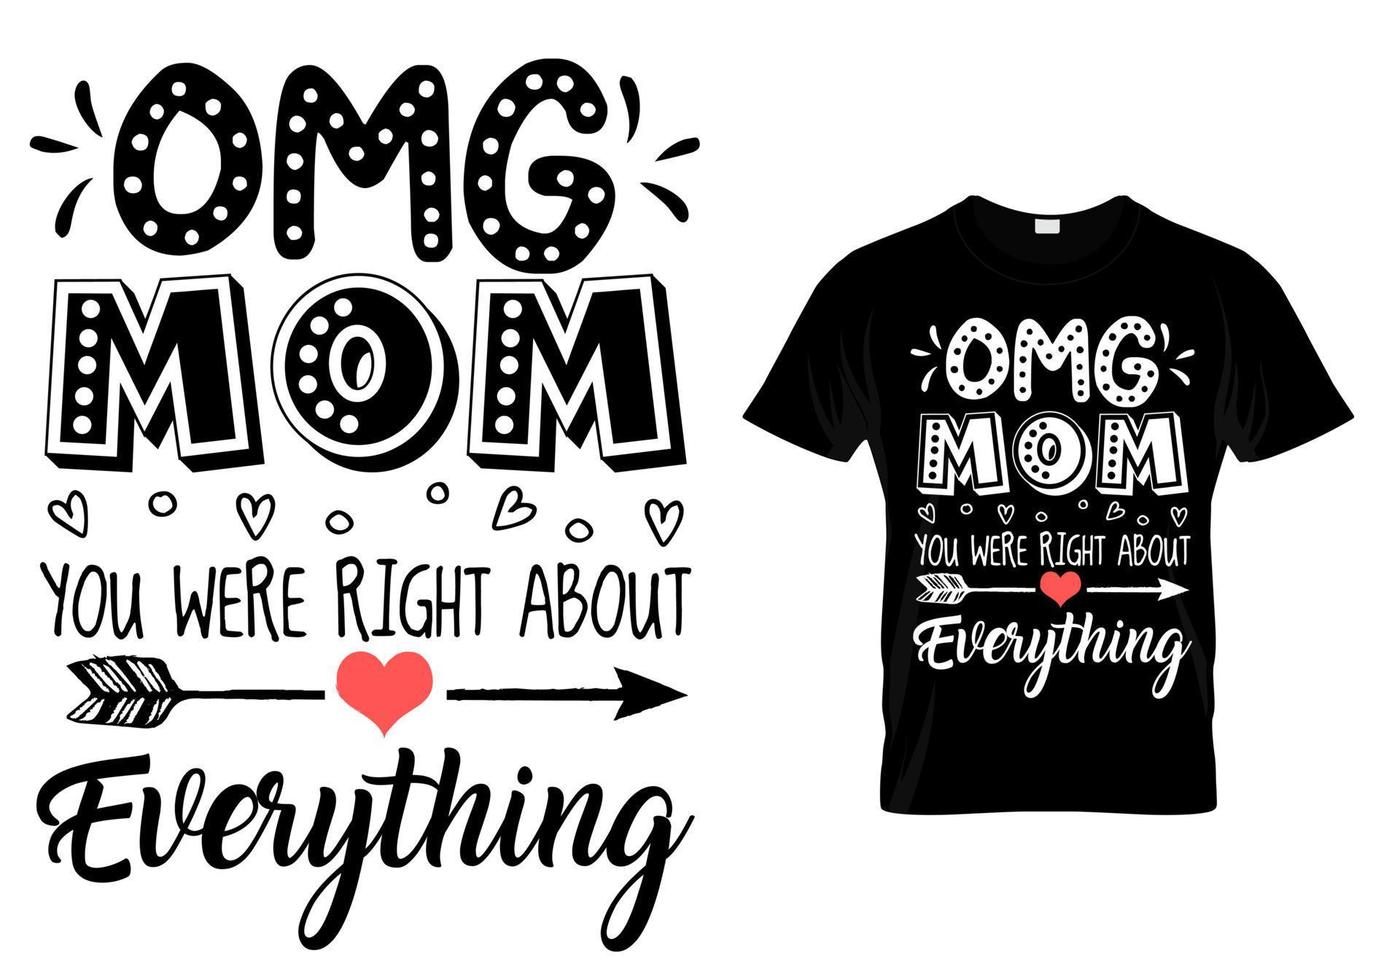 OMG mom you were right about everything typography t shirt design vector